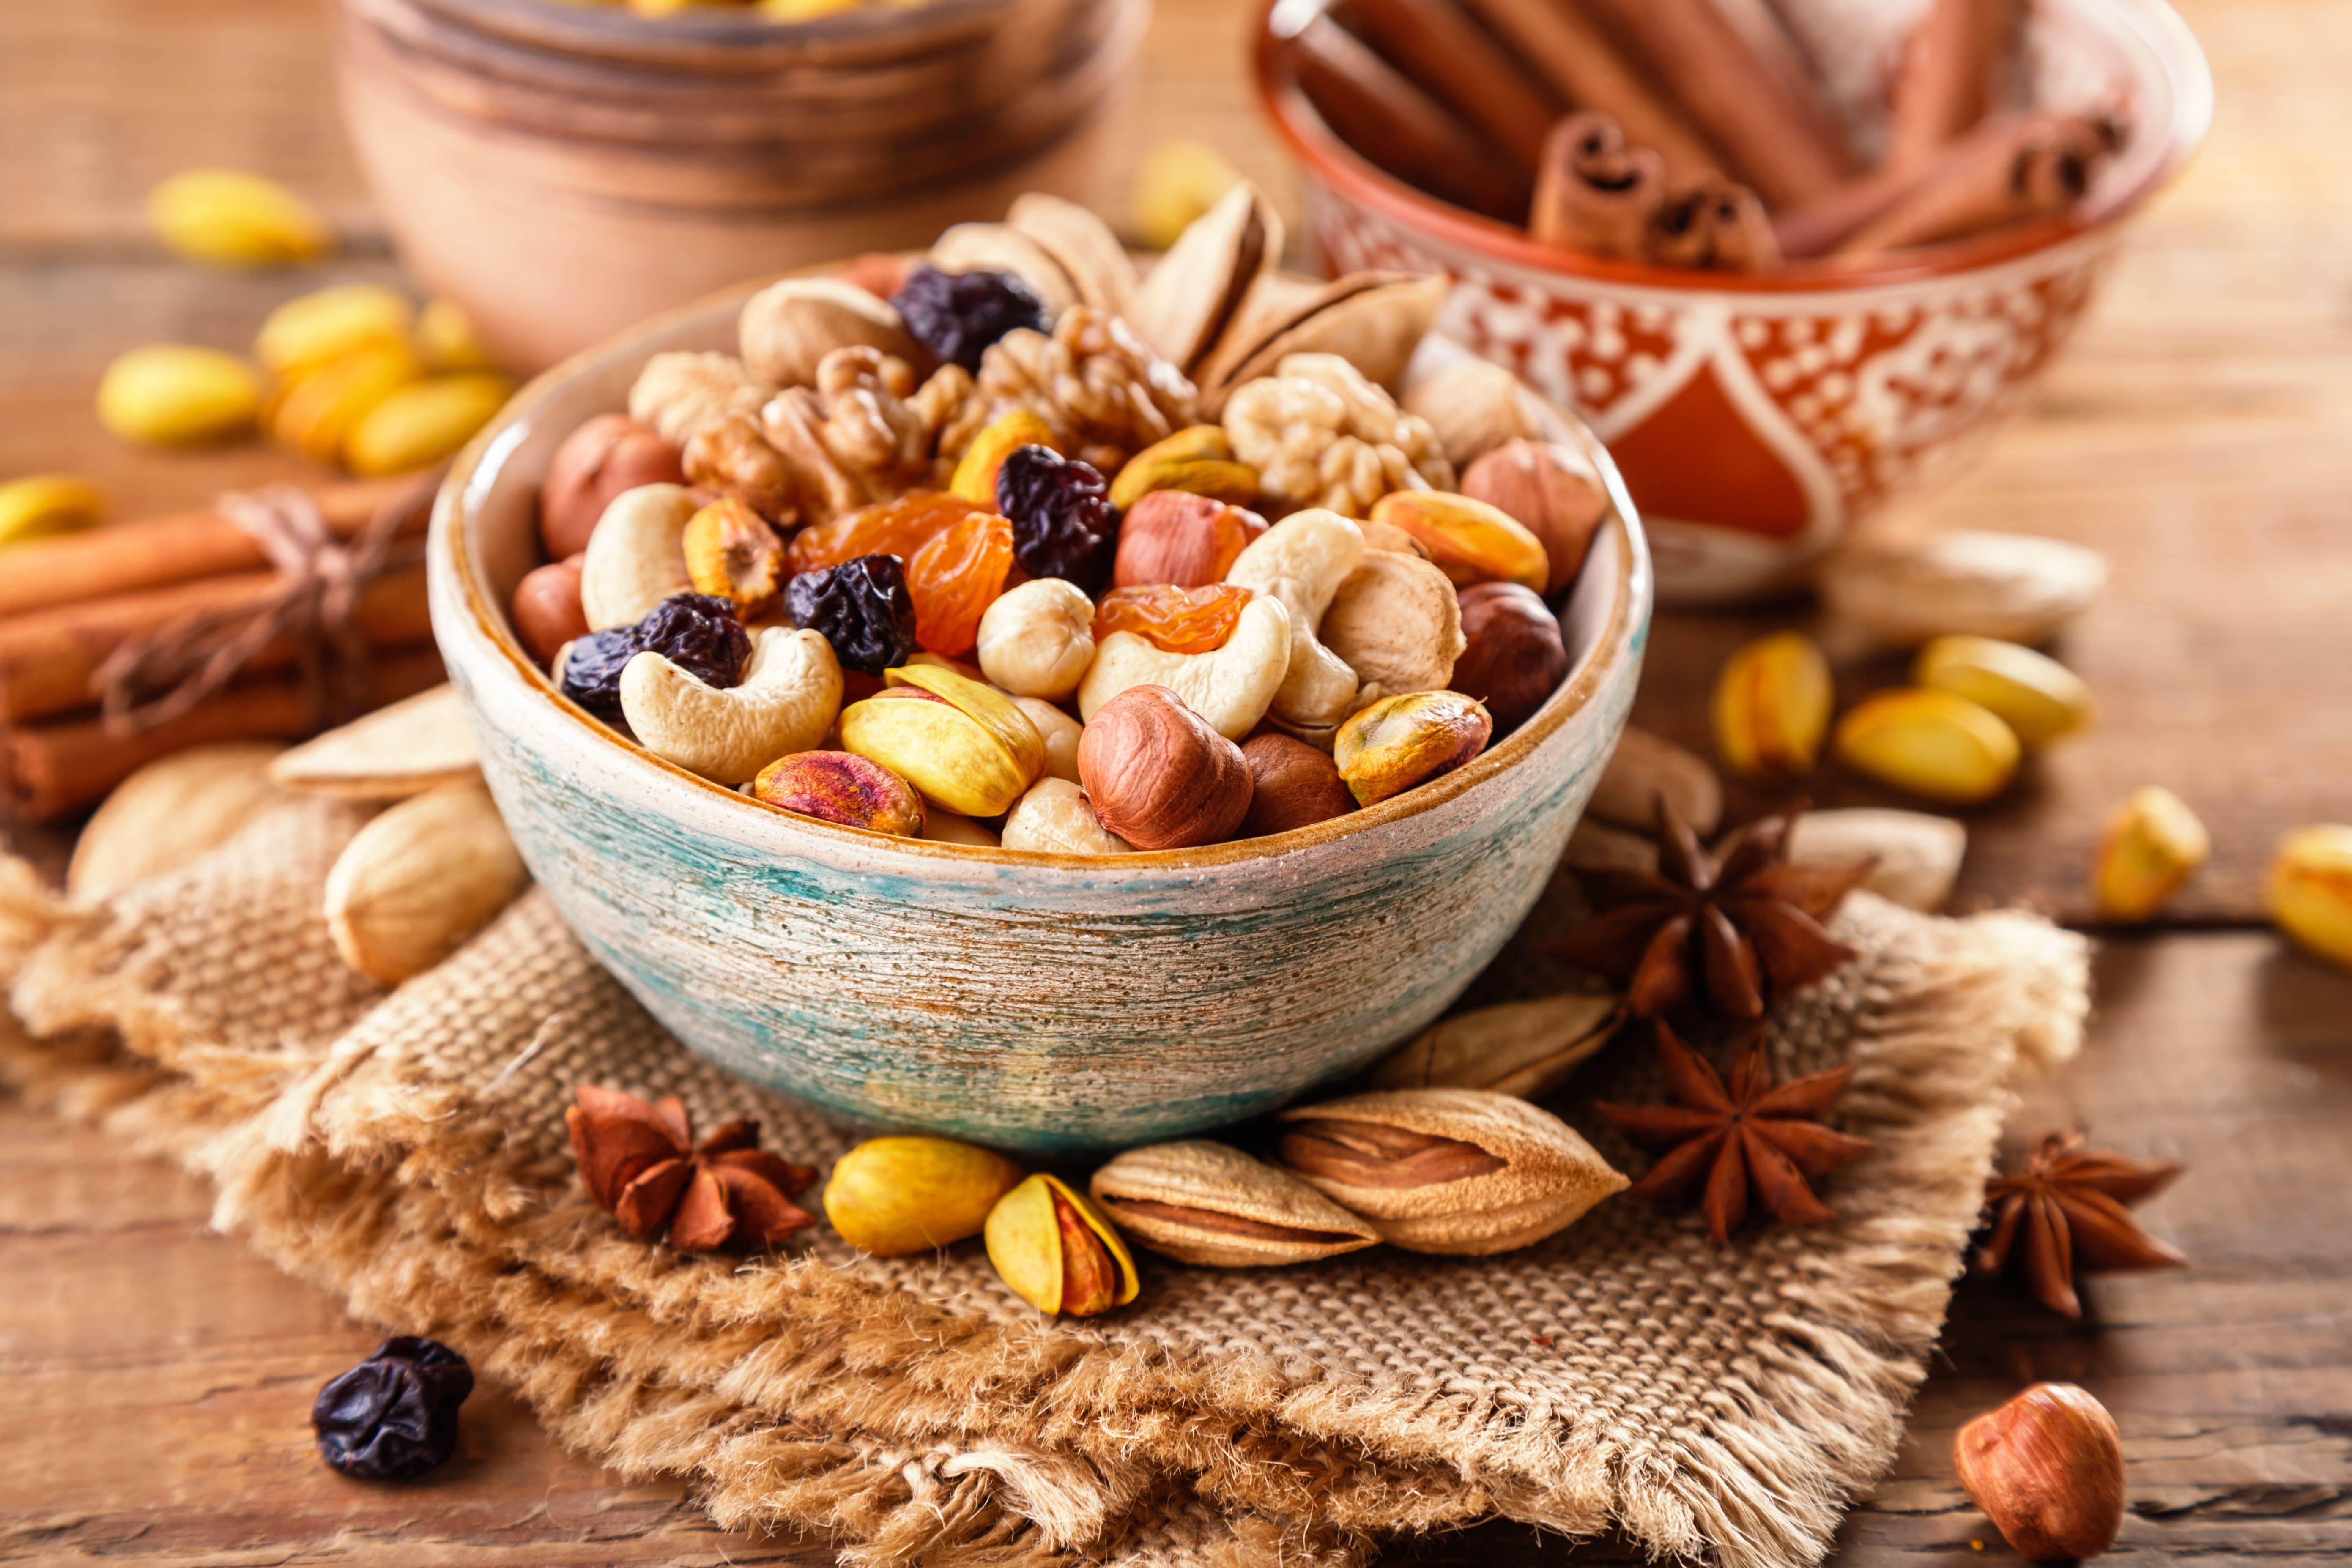 Bowl Full of Mixed Nuts and Dried Fruit 4k Ultra HD Wallpaper